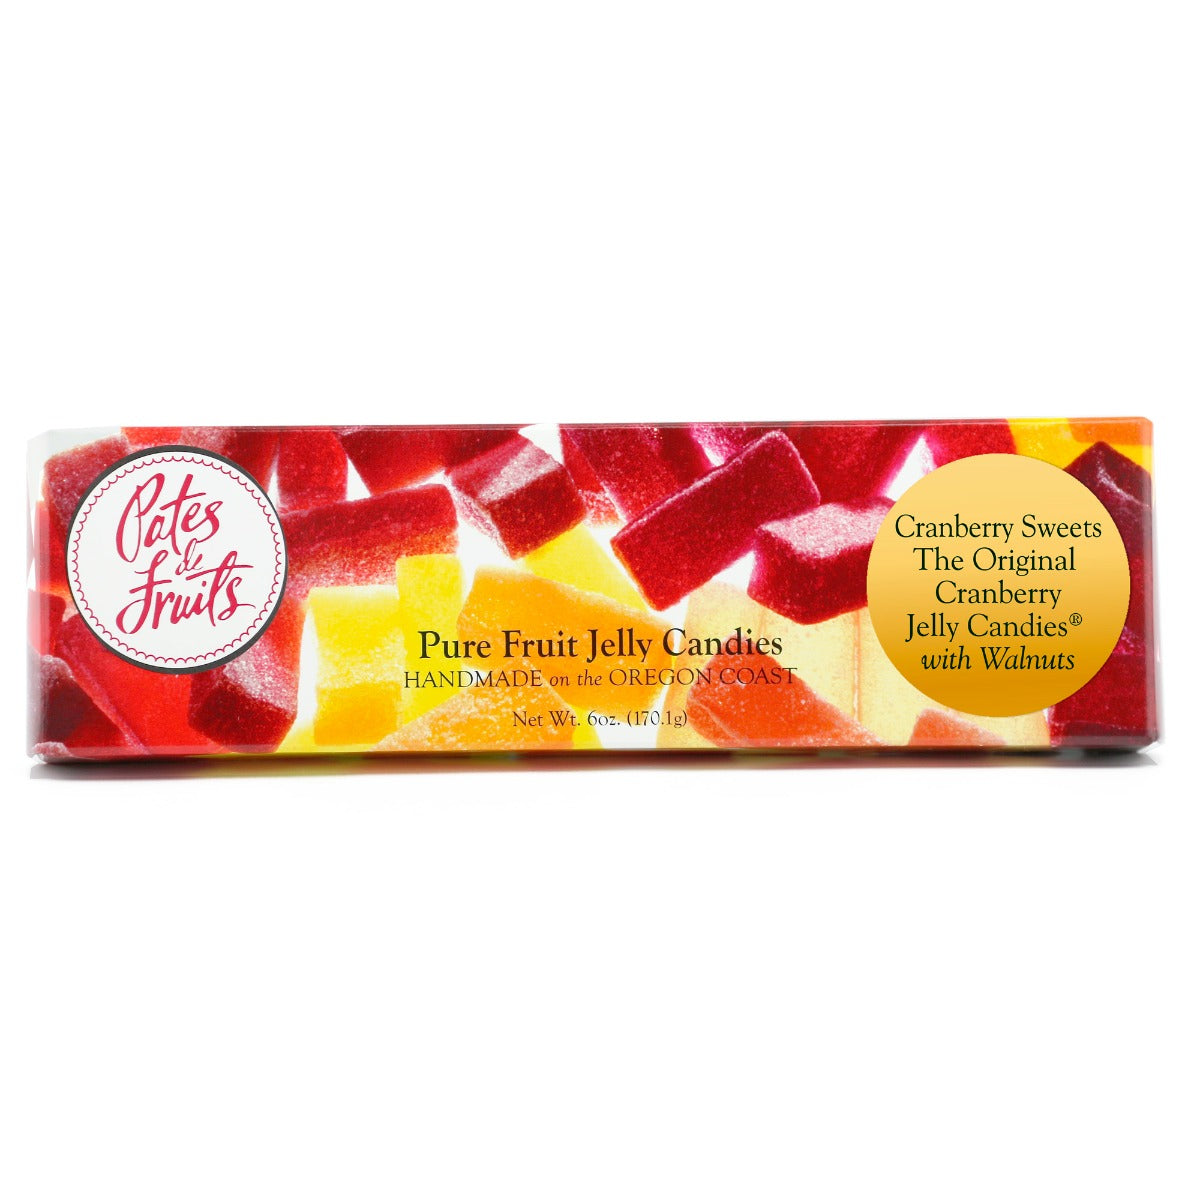 Original Cranberry Jelly Candies with Walnuts 6oz.